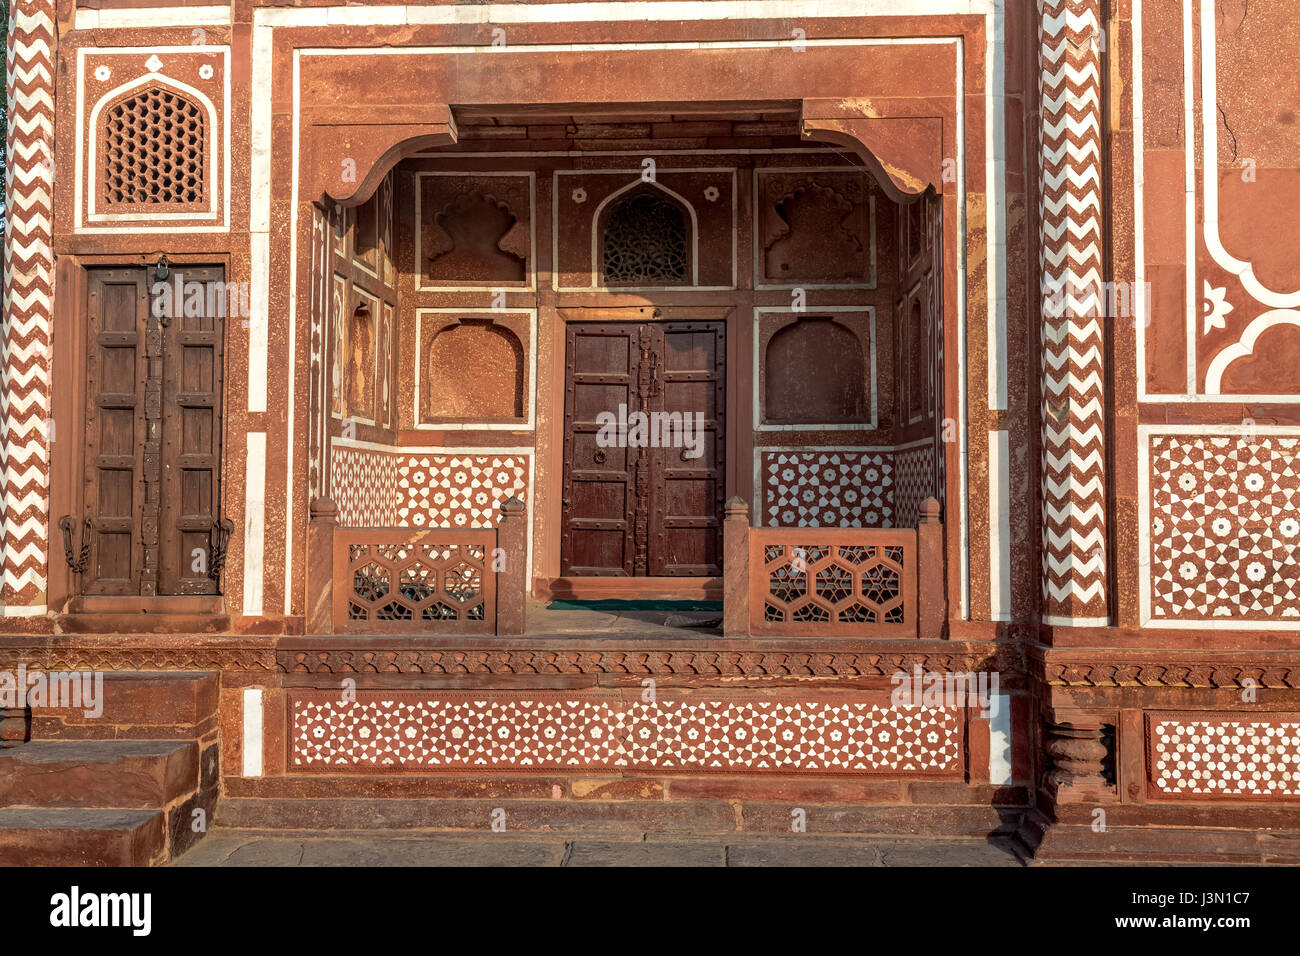 Mughal architecture entrance door to Baby Taj also known as the tomb of Itimad-ud-Daulah. Stock Photo